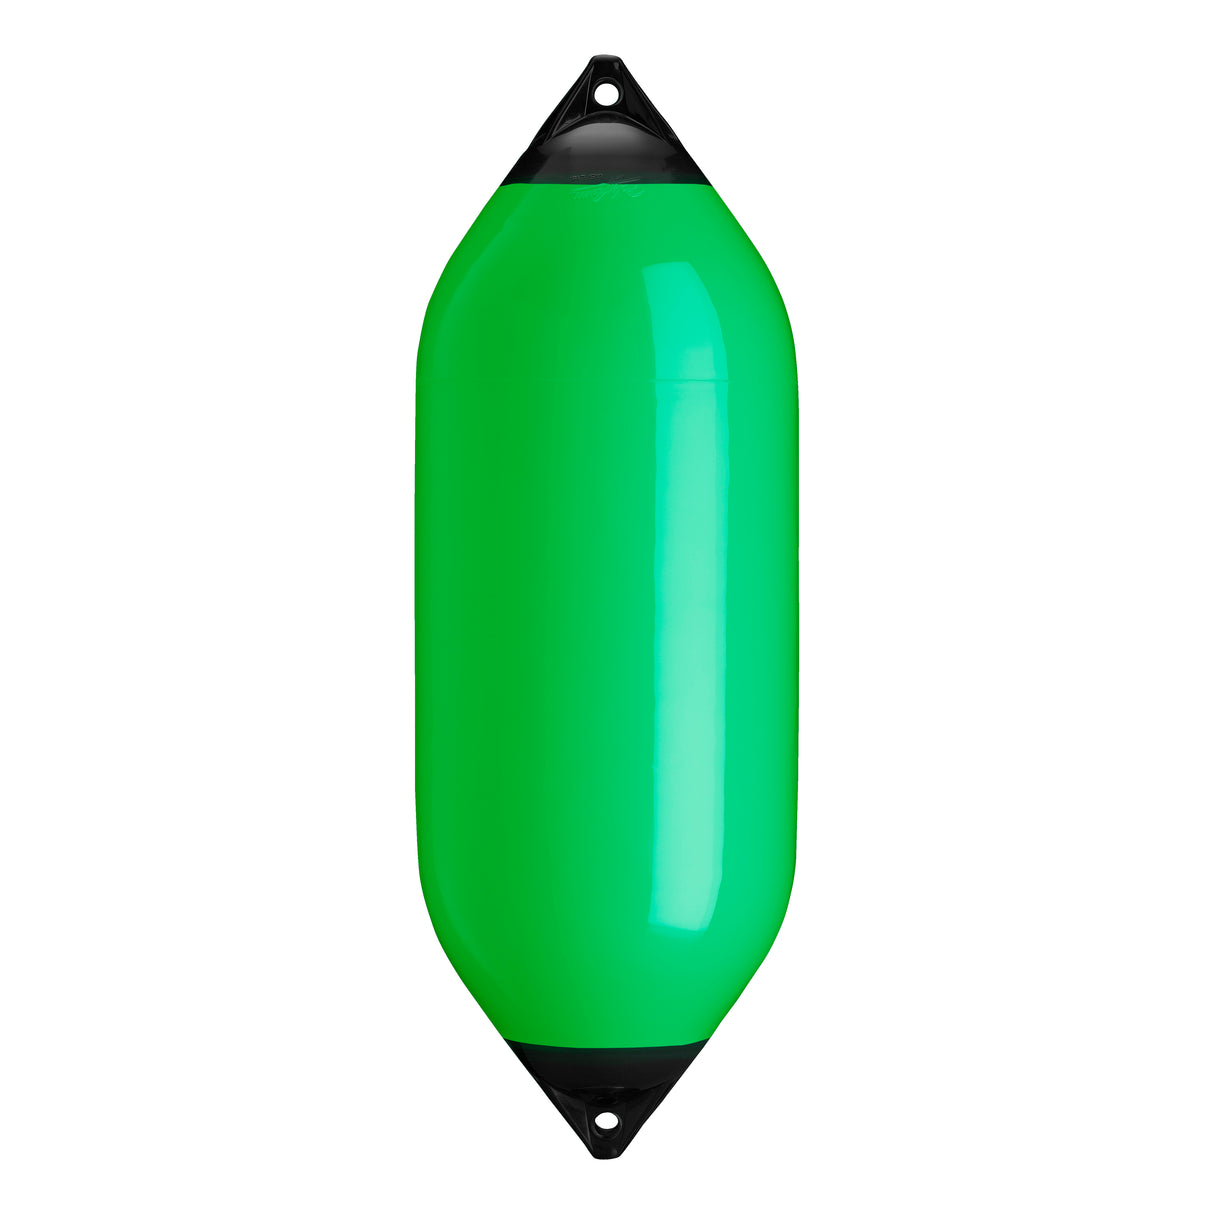 Green boat fender with Navy-Top, Polyform F-10